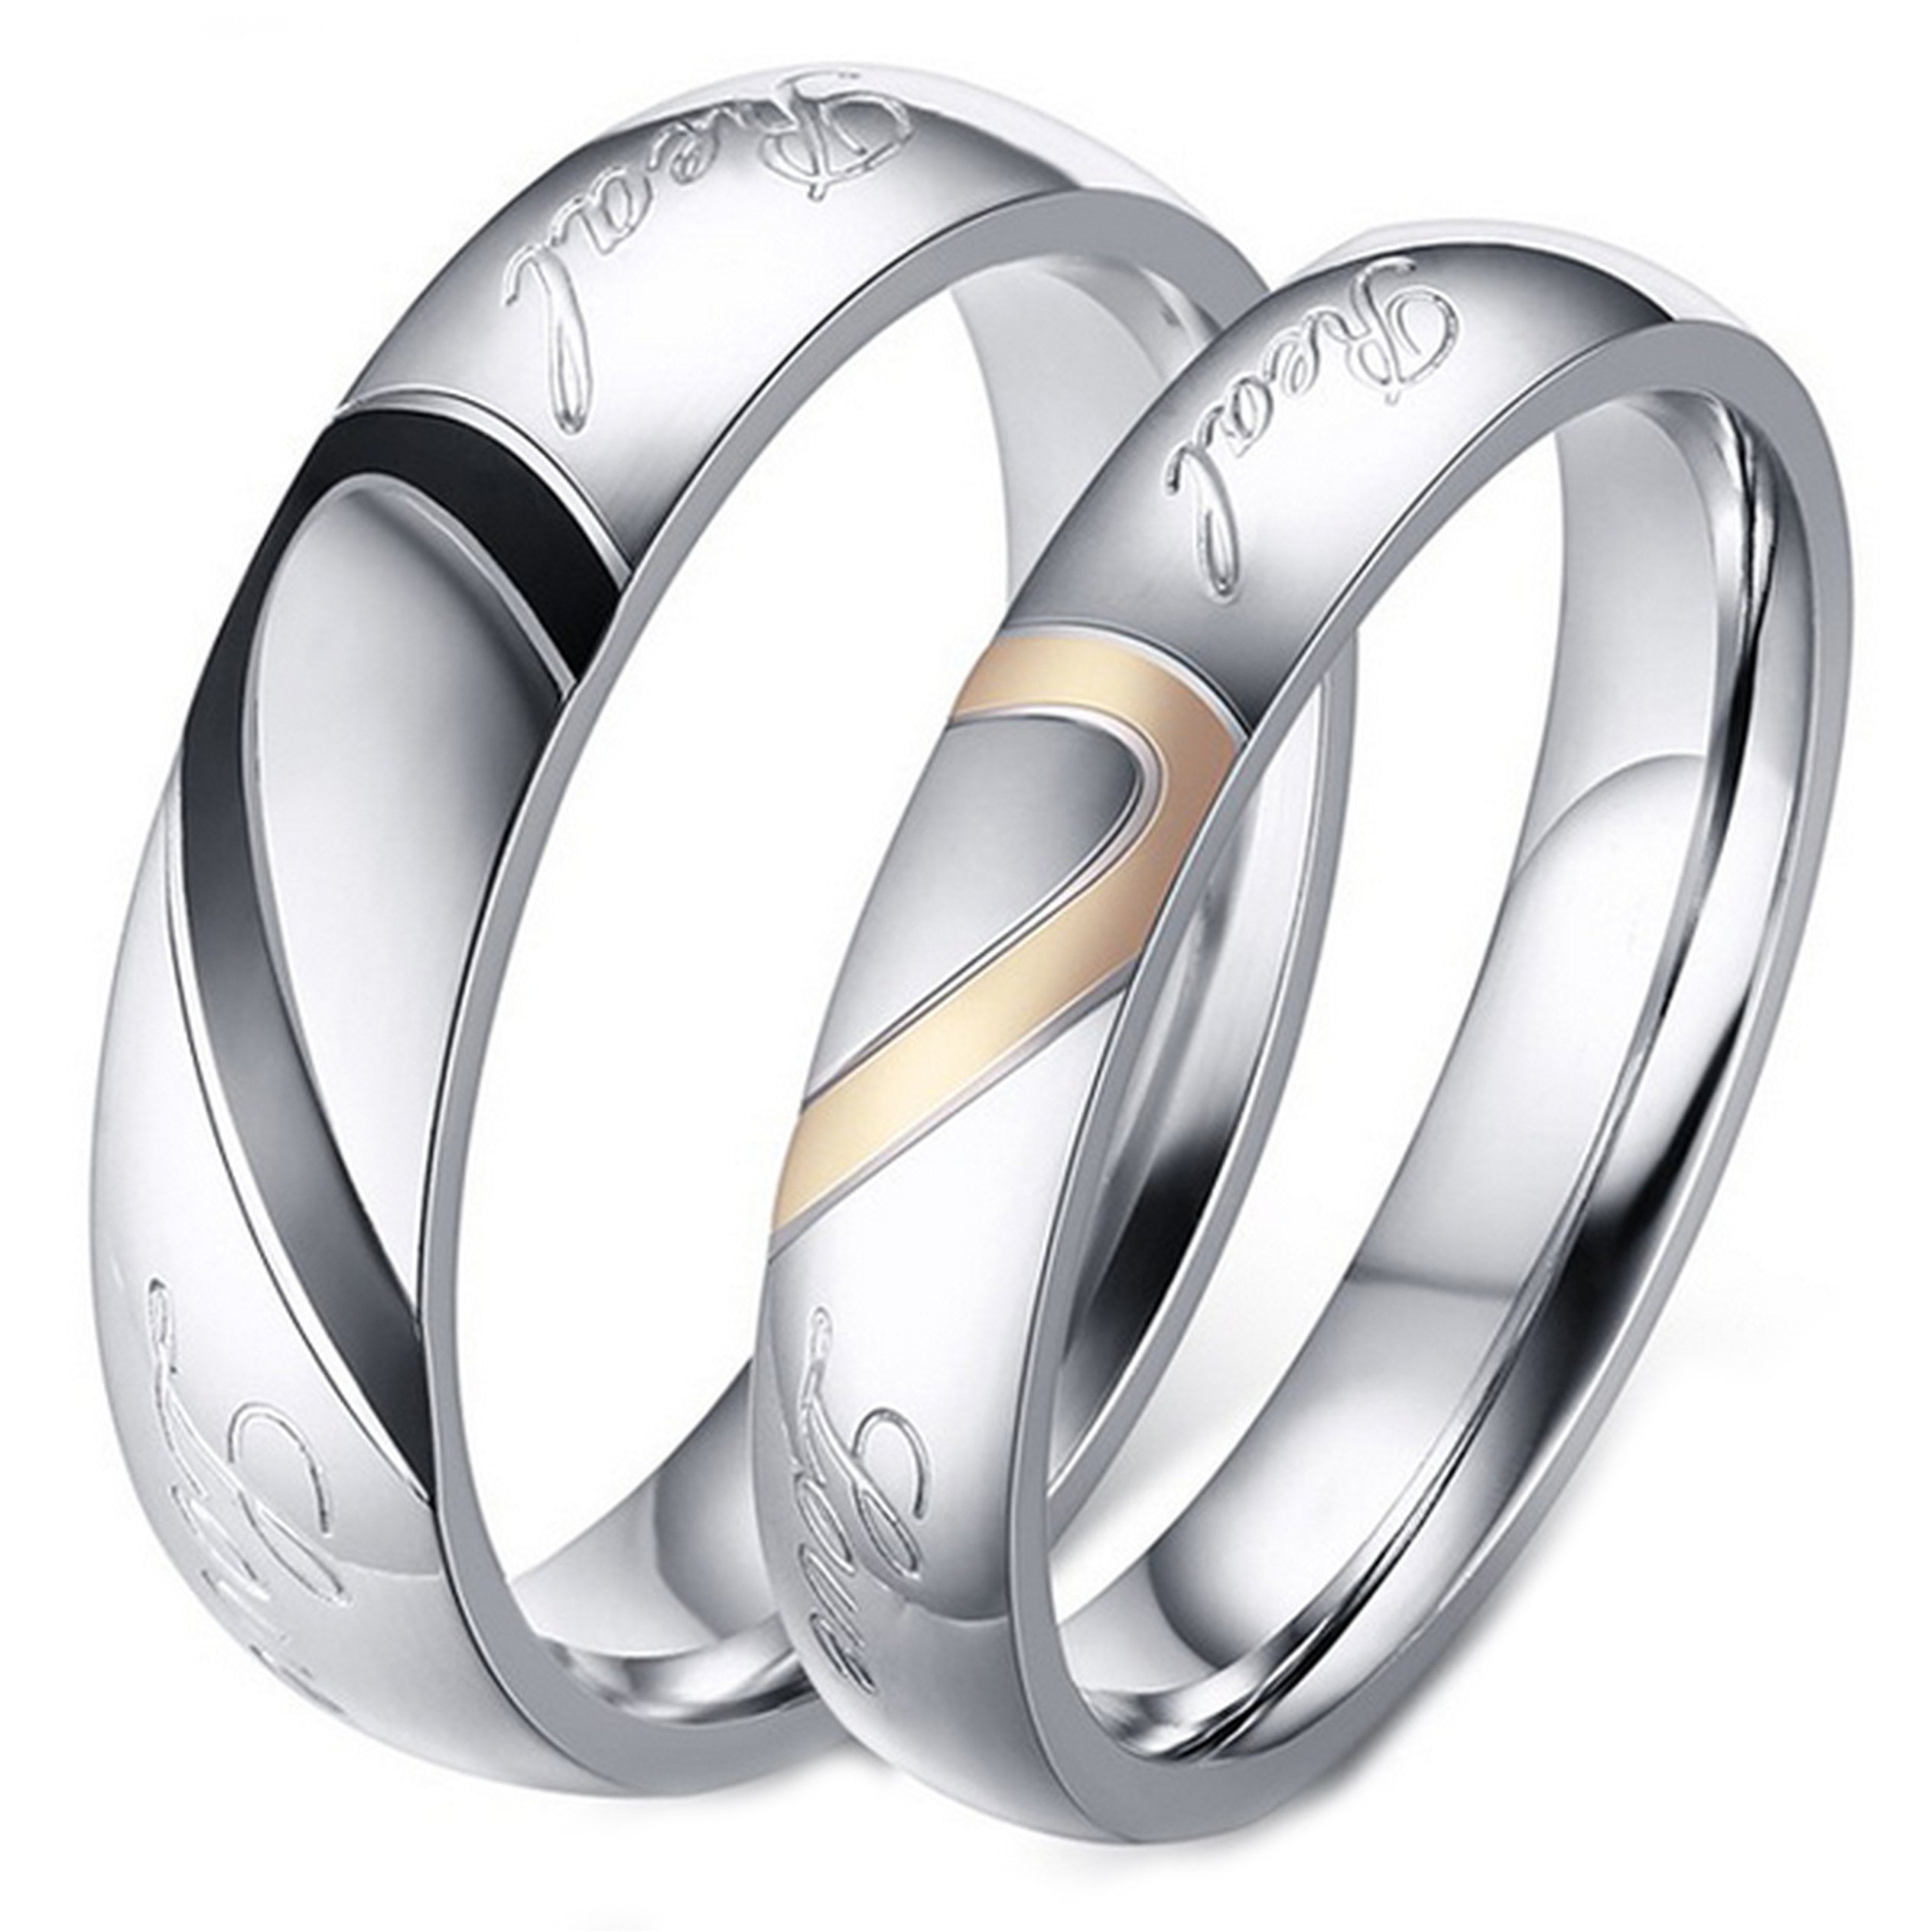 For Lovers GIFT BOXED !! NEW Stainless Steel “Real Love” HALF HEART RINGS SET 